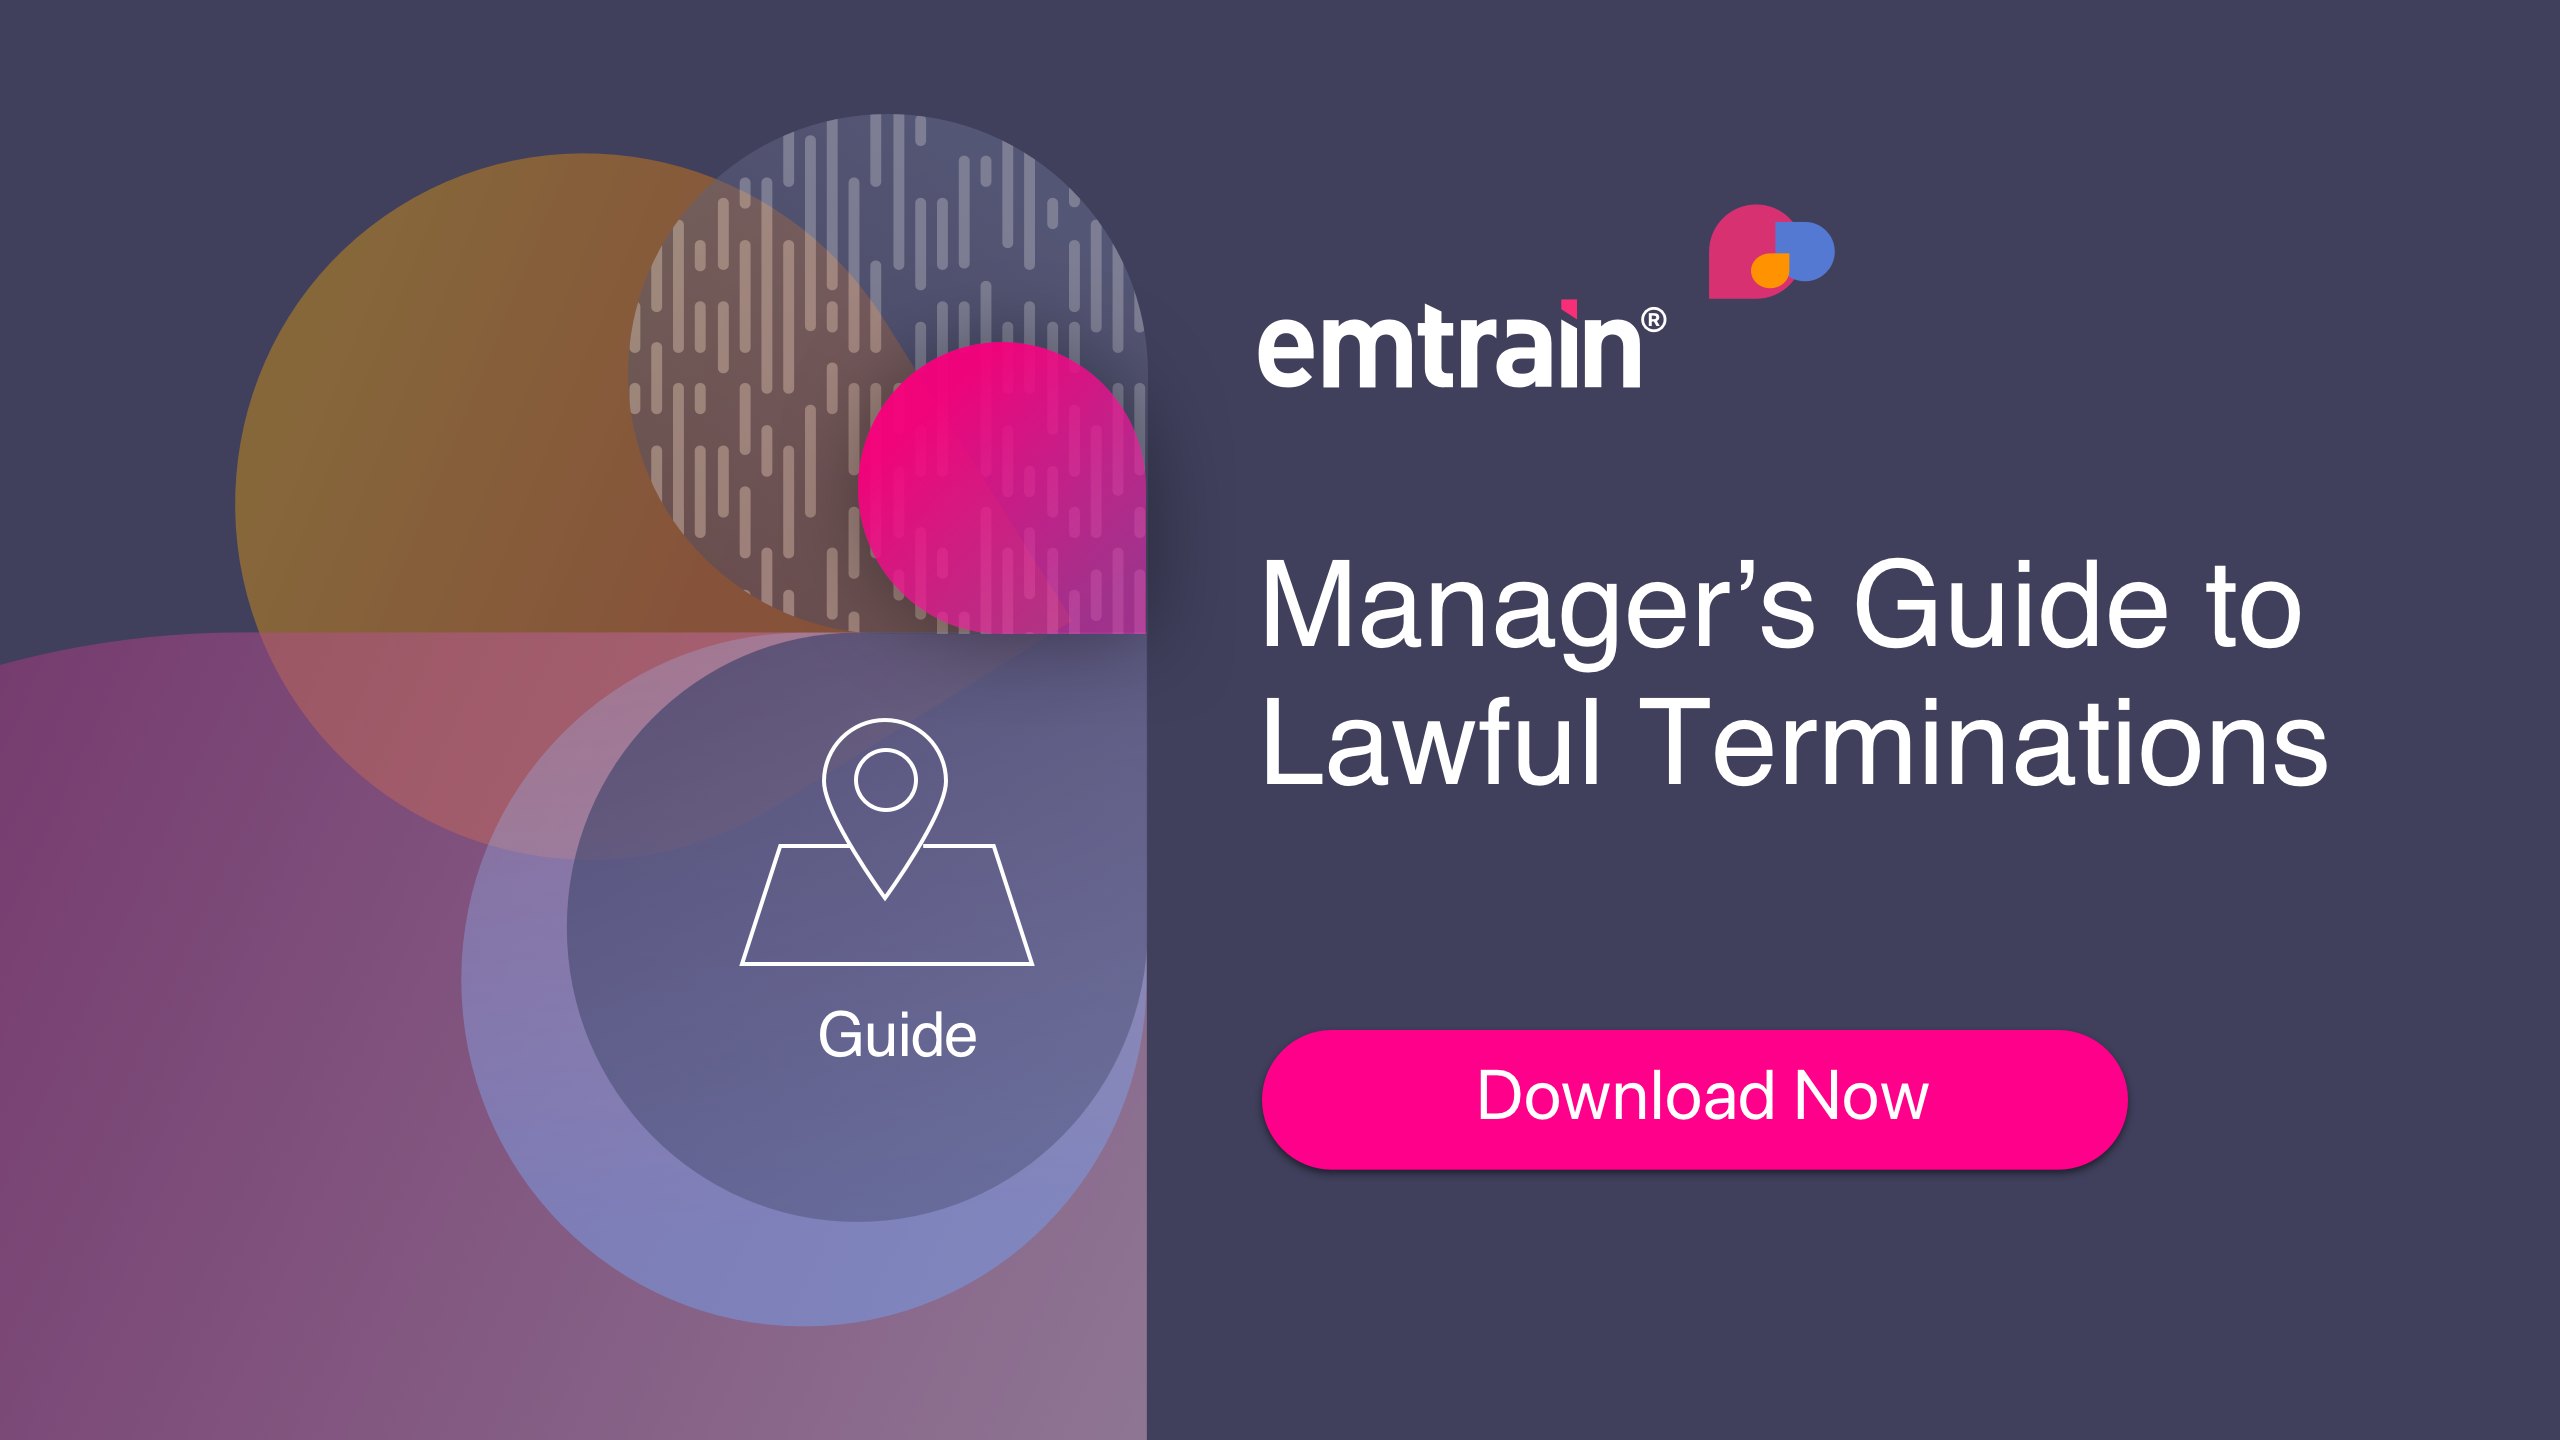 Manager’s Guide to Lawful Terminations